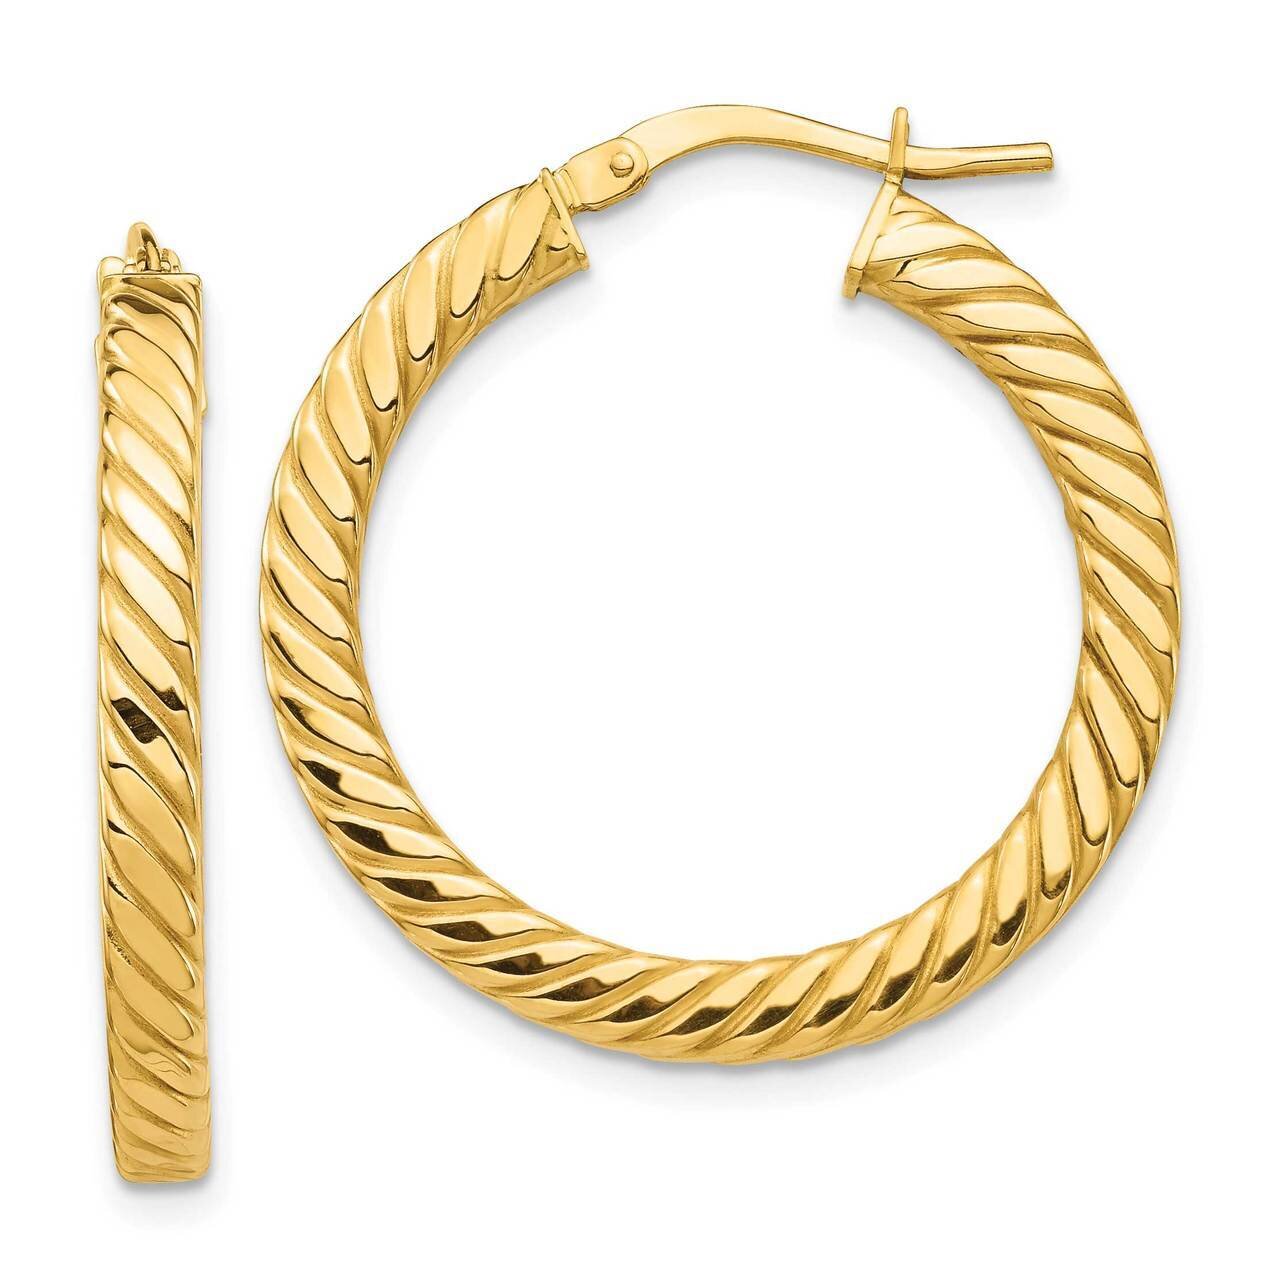 Twisted 3mm Square Tube Hoop Earrings 14k Gold Polished TF1392